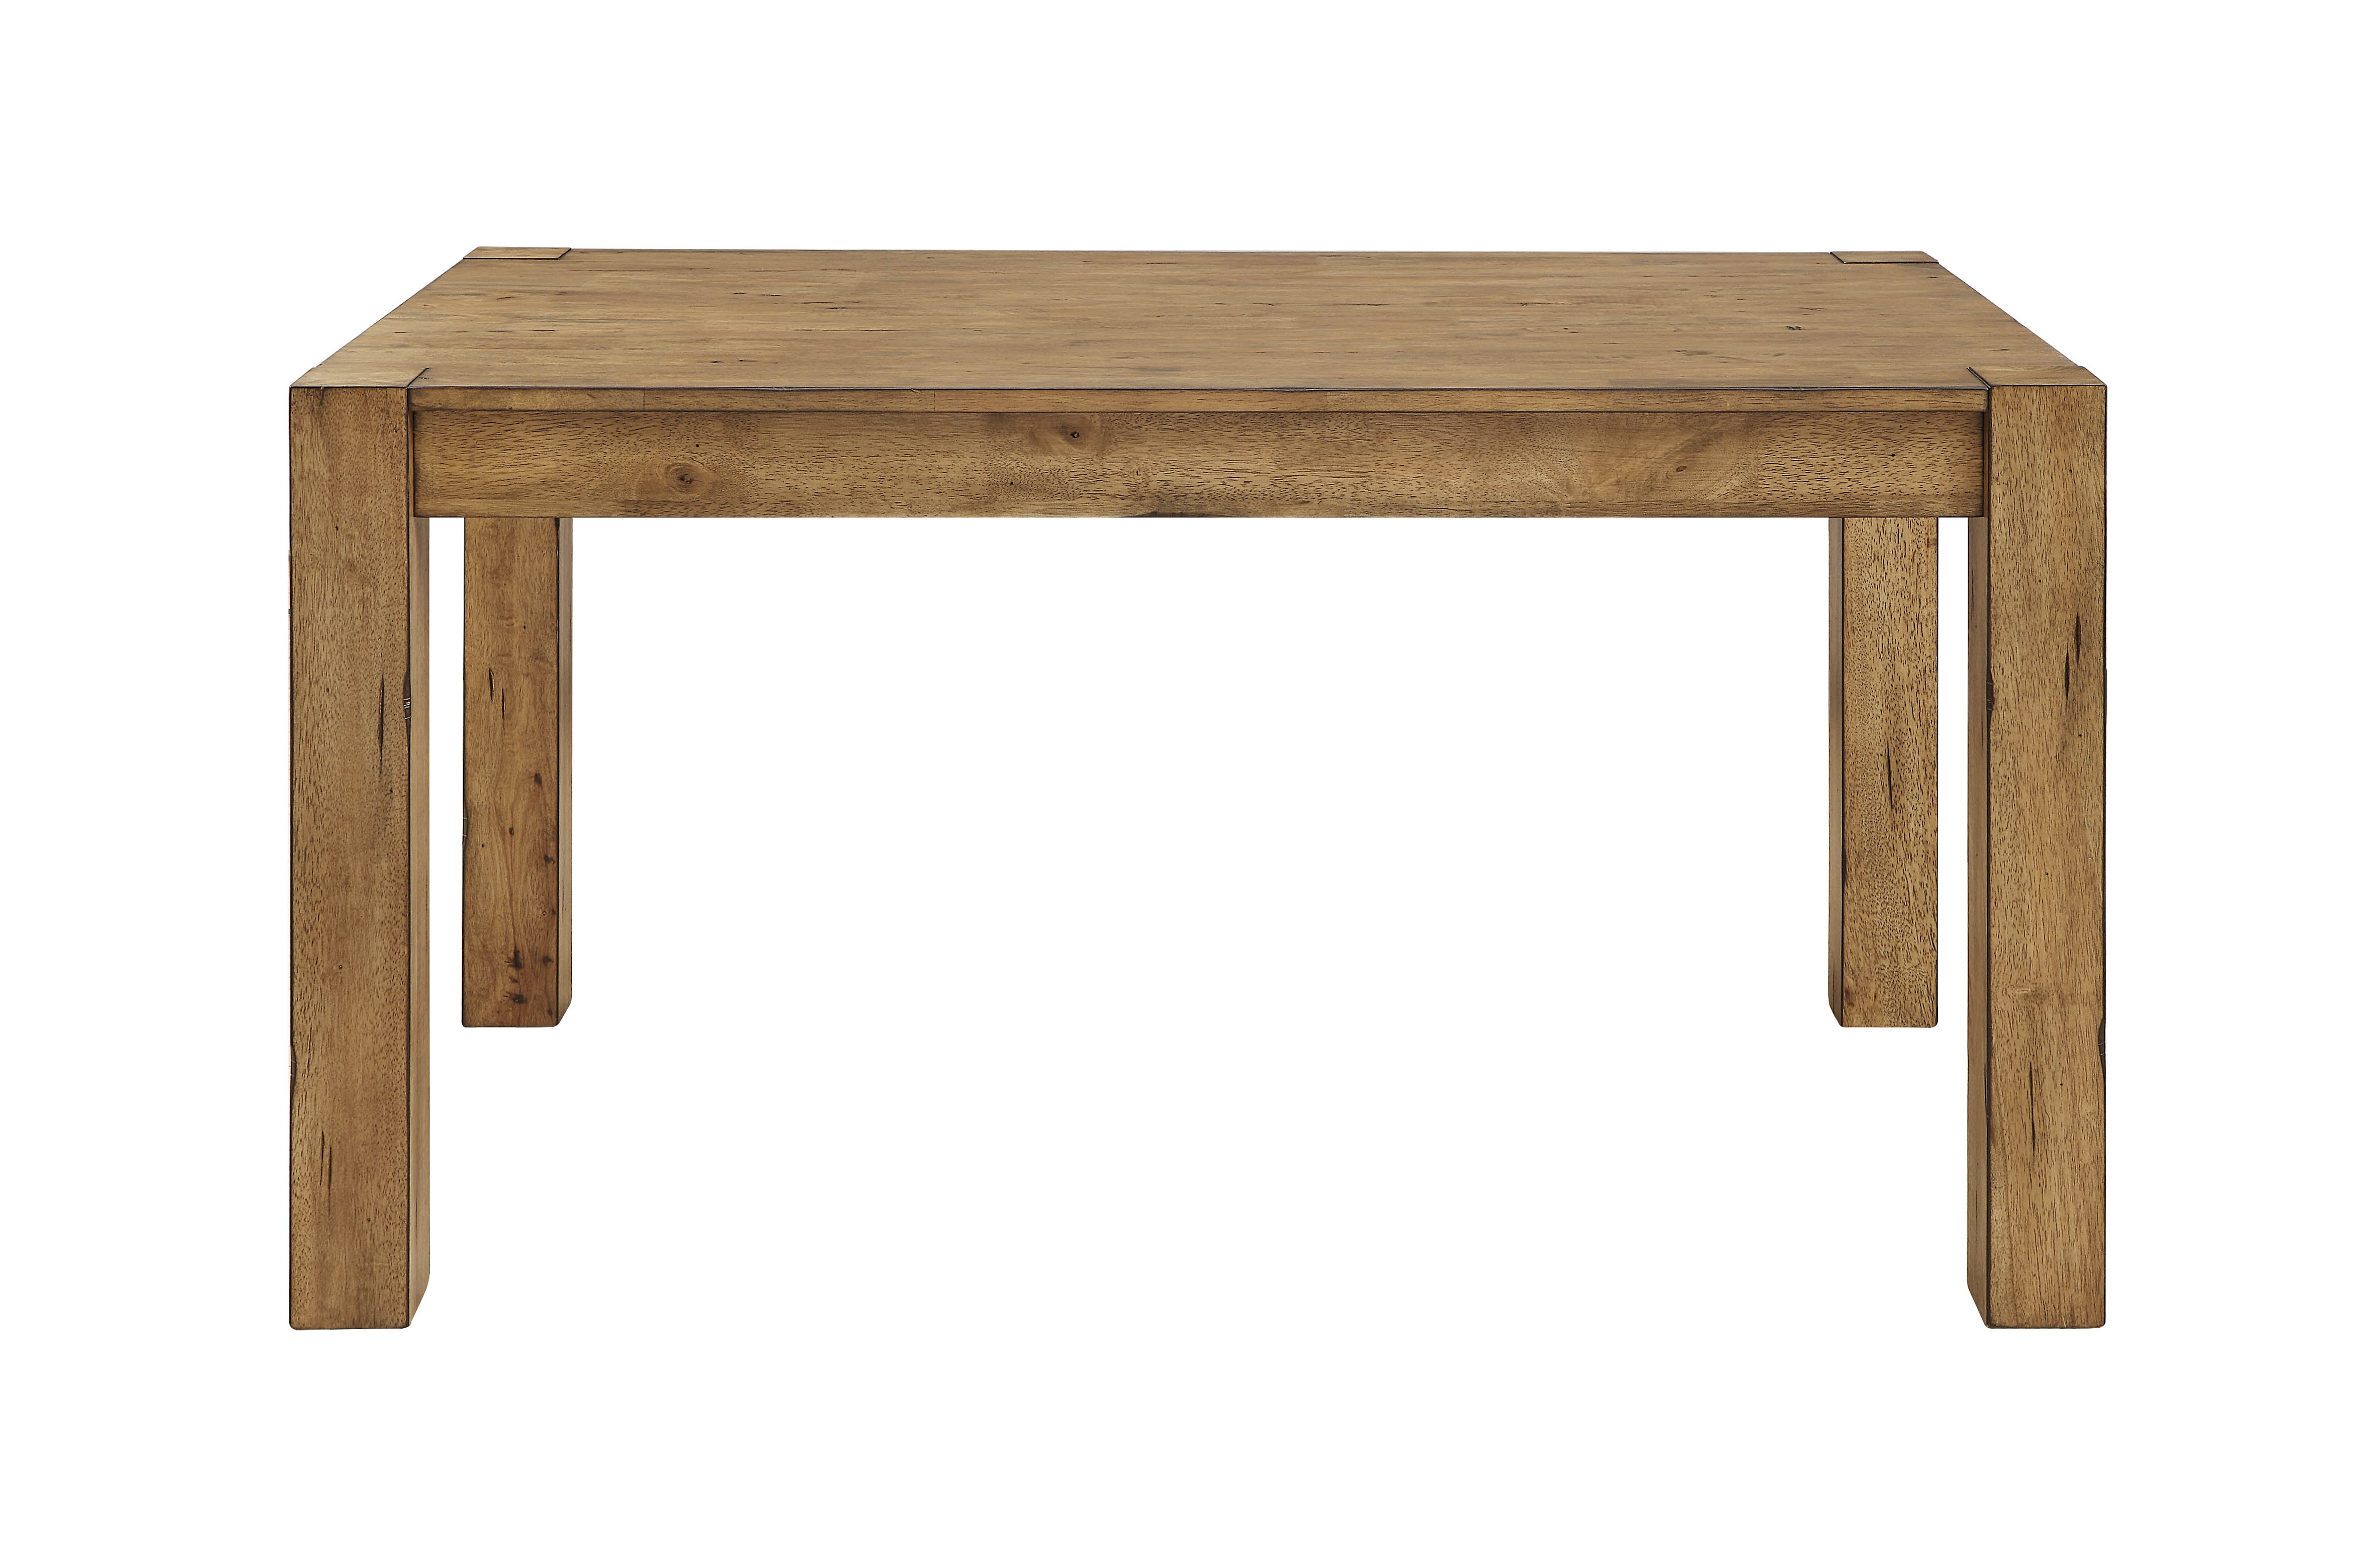 Better Homes & Gardens Bryant Solid Wood Dining Table, Rustic Brown - image 3 of 14